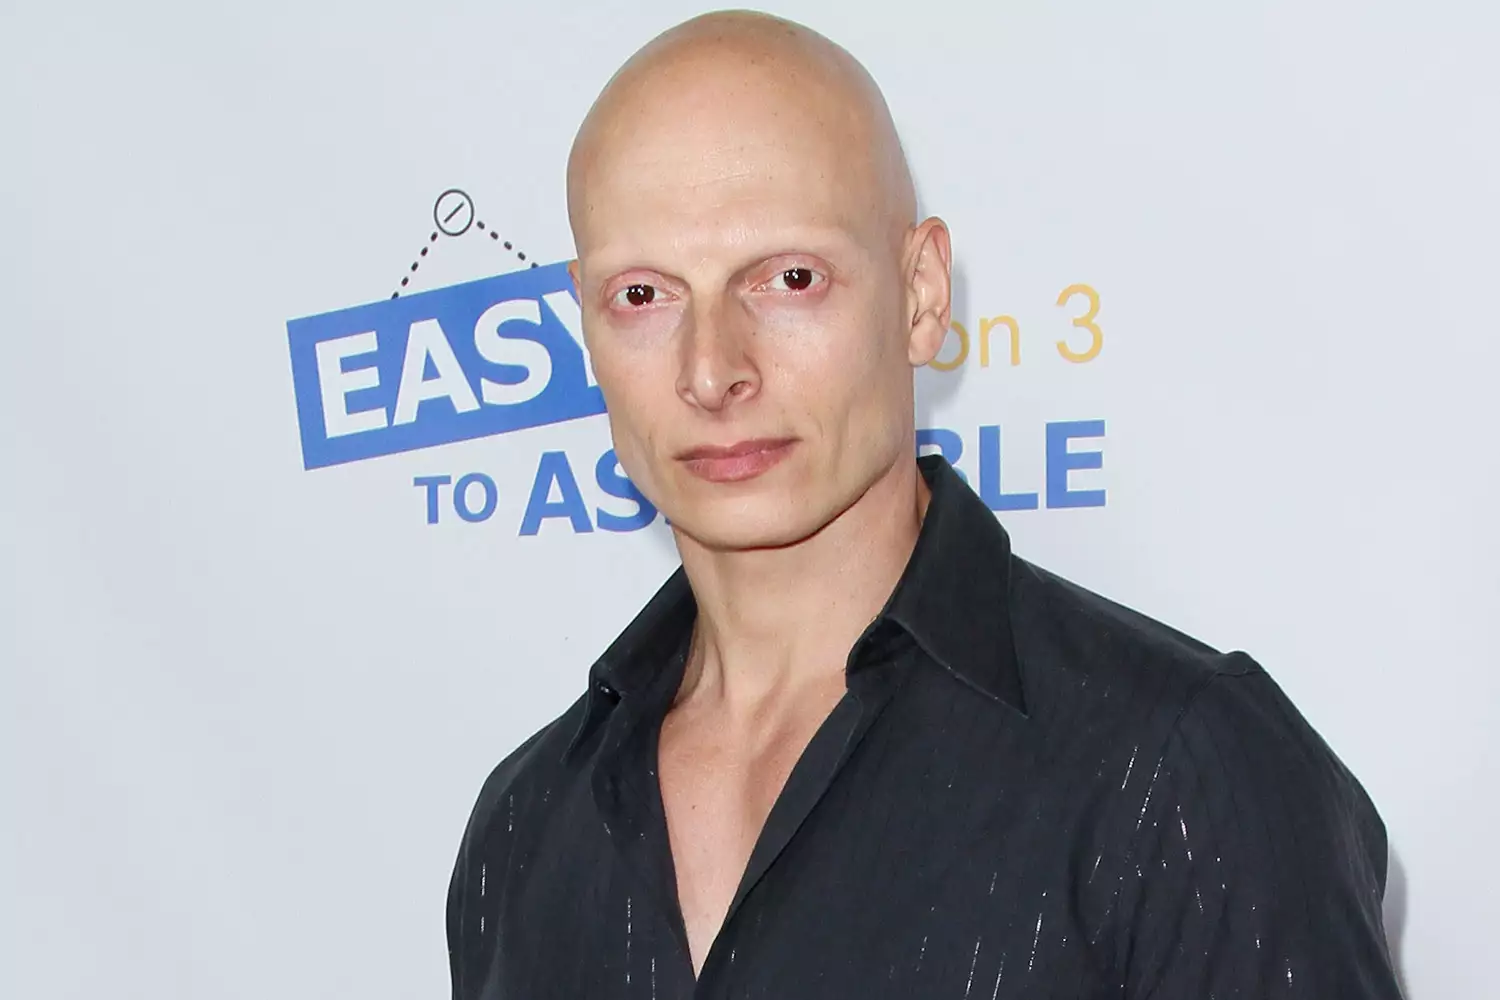 Joseph Gatt Has Been Arrested For Alleged Sexually Explicit Communication With A Minor